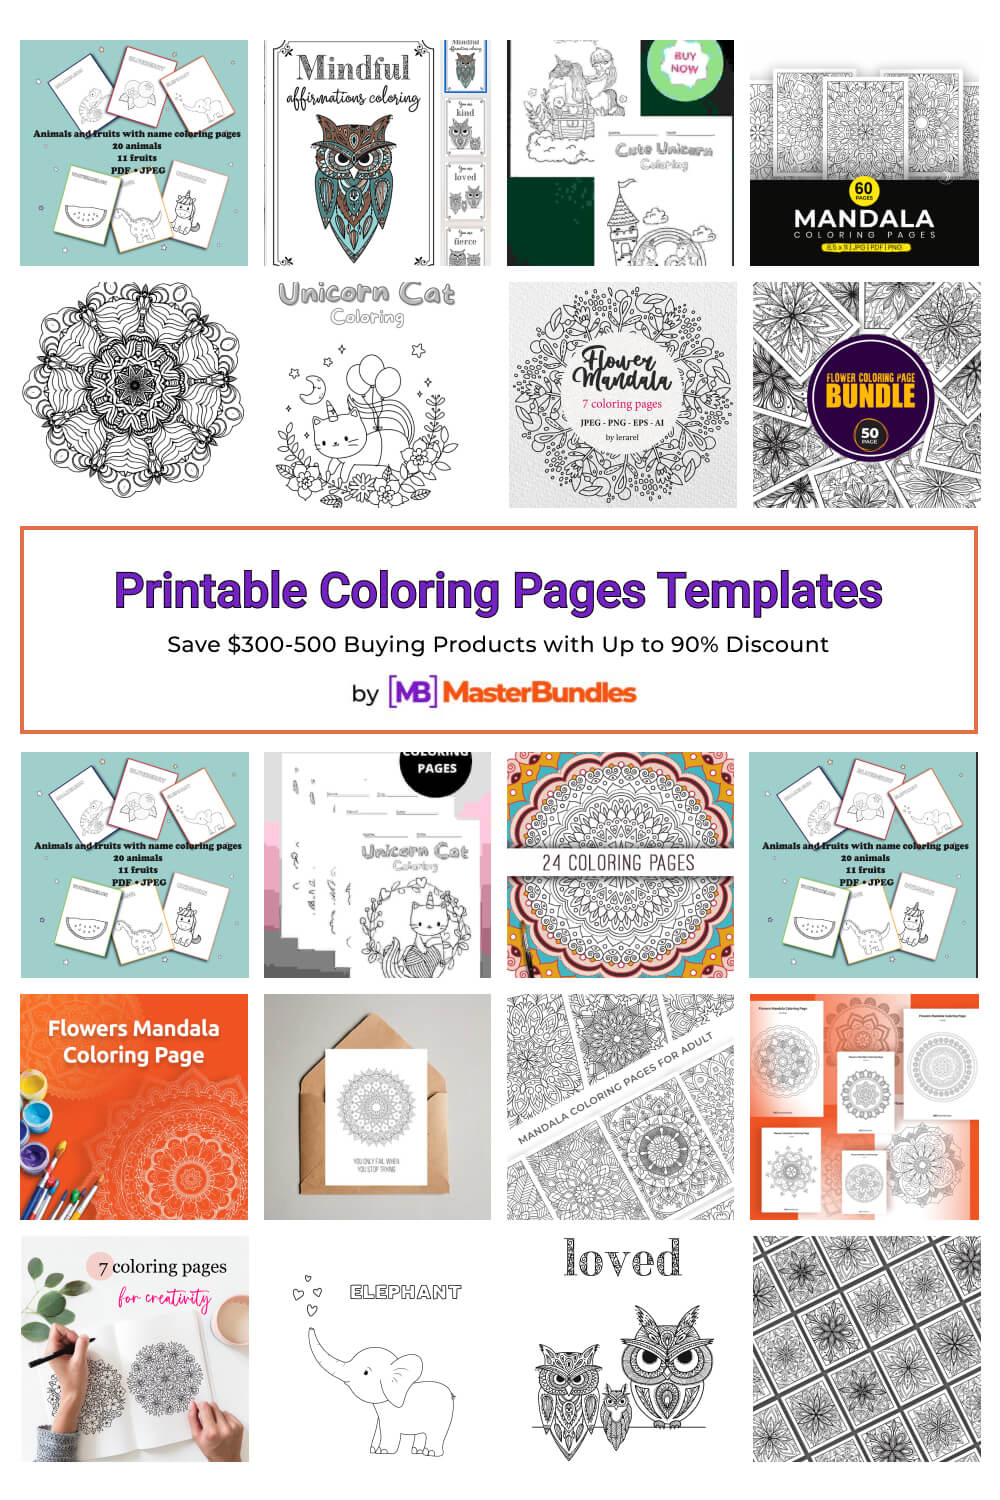 printable coloring pages templates pinterest image.